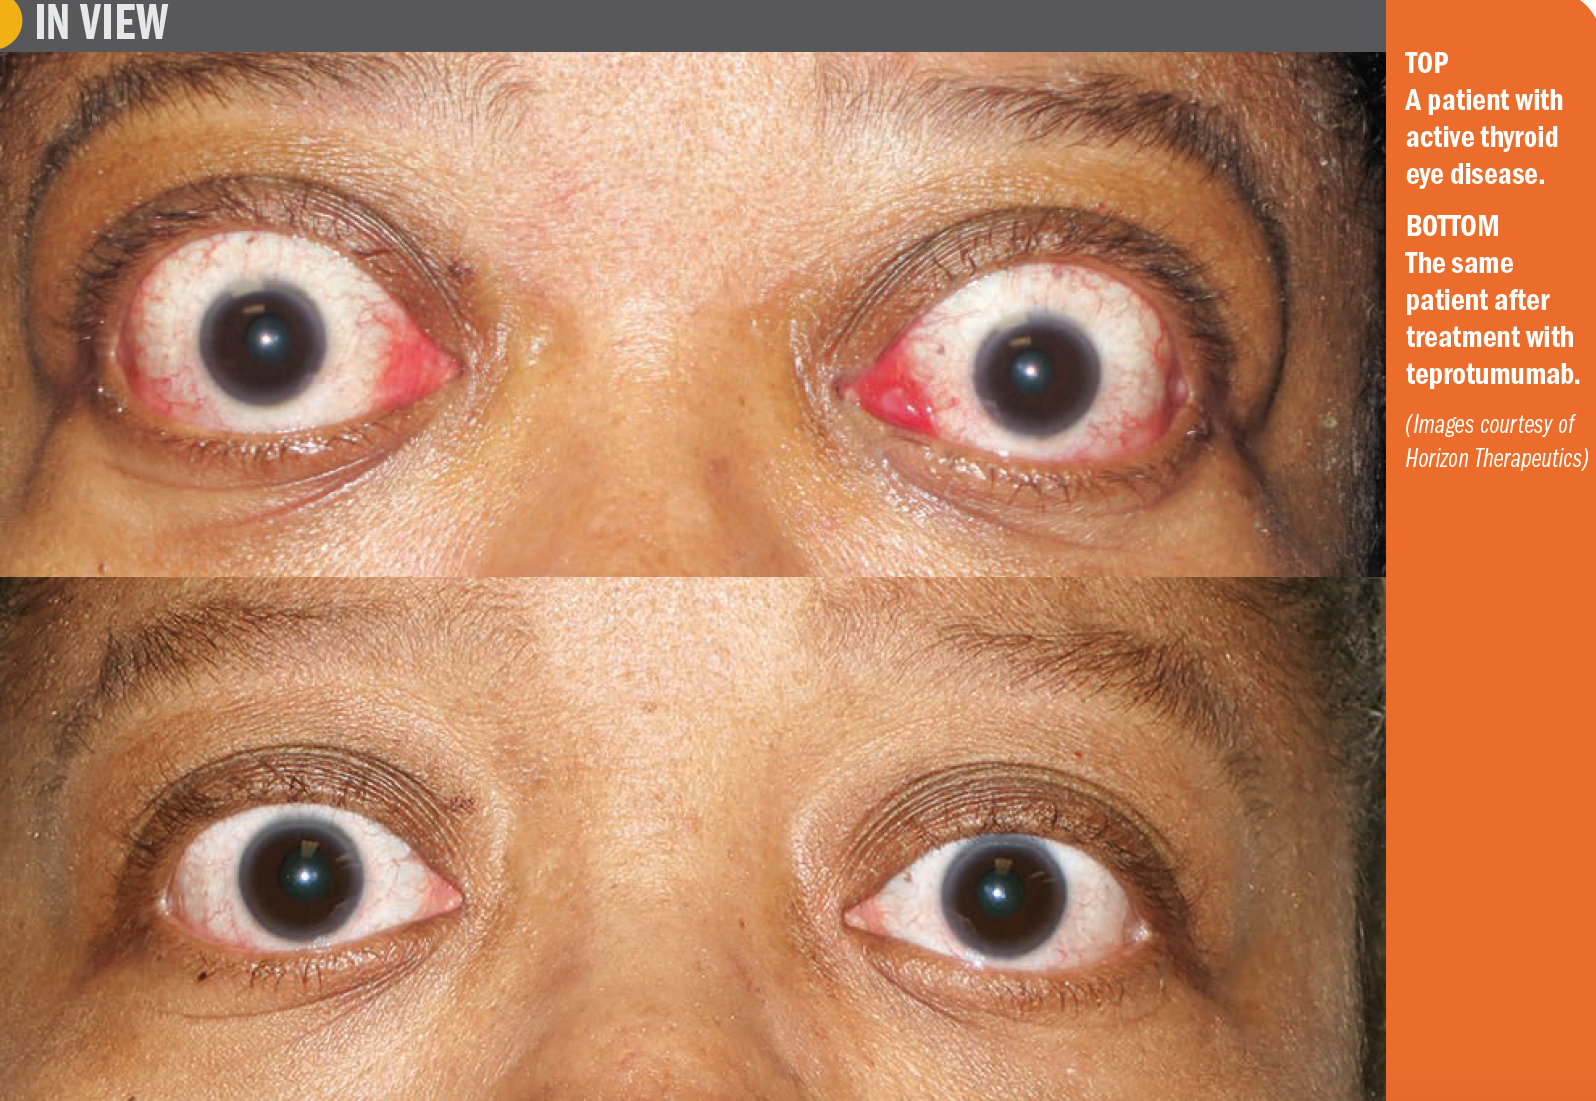 A patient with active thyroid eye disease/treated with teprotumumab